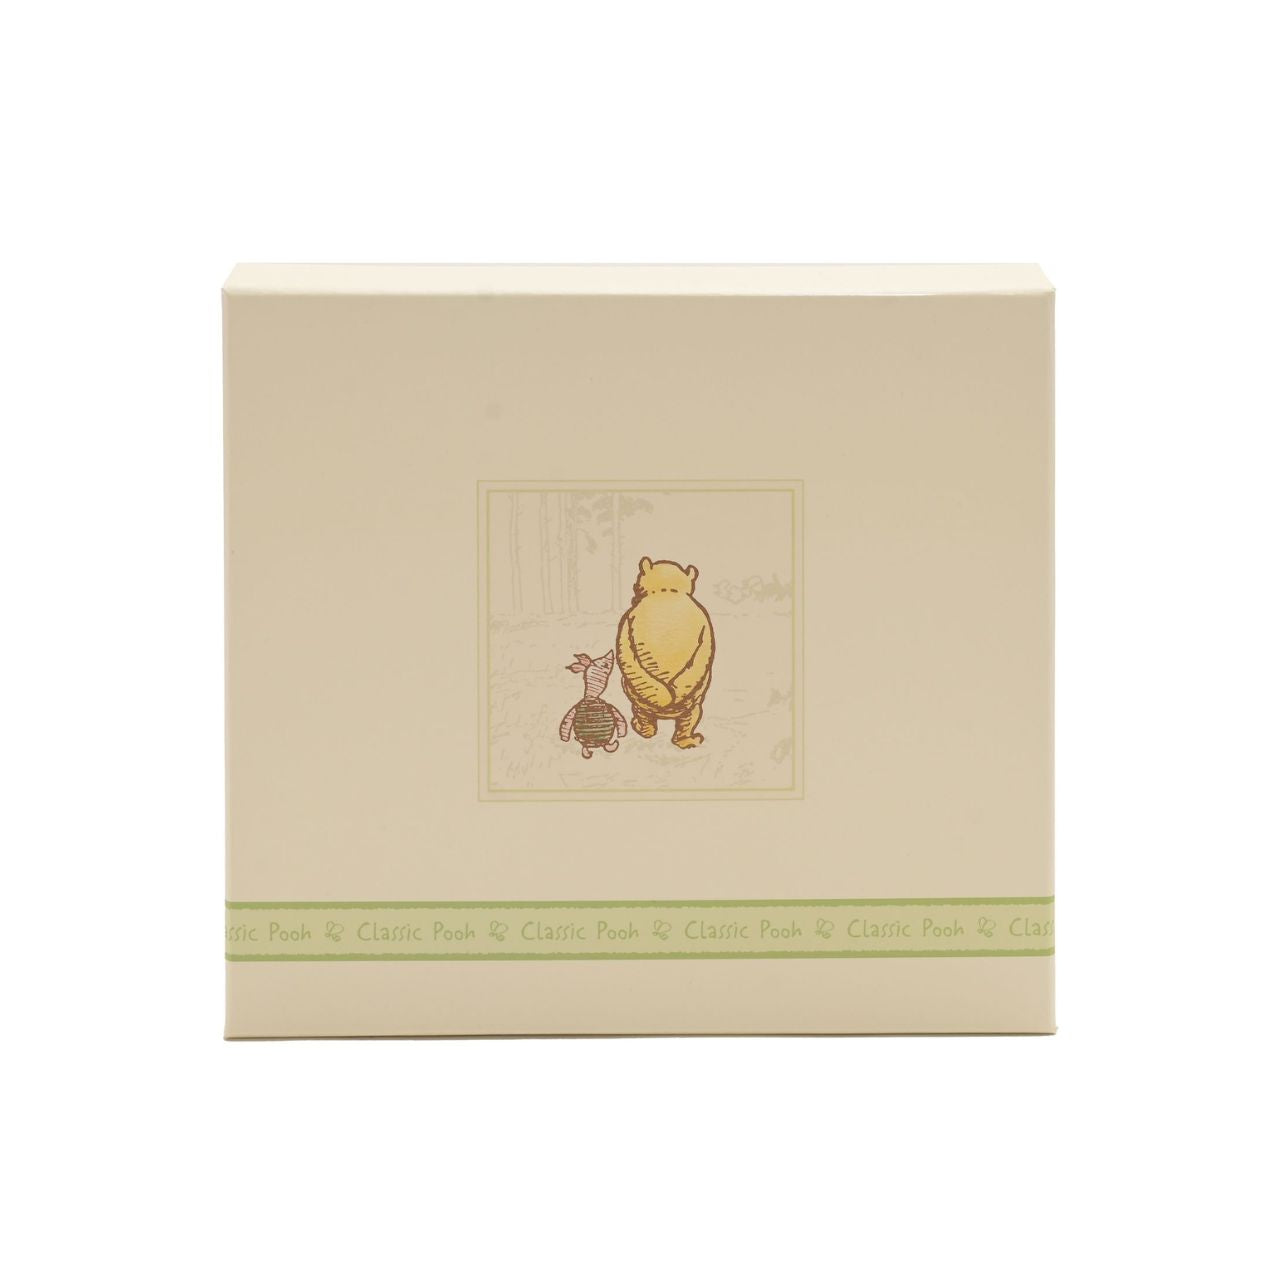 Disney Classic Pooh Heritage Photo Album Box My First Photos  This Winnie the Pooh keepsake photo album has been designed to reflect E.H. Shepard's original illustrations from the original A. A. Milne books, to be cherished for many years. Includes 80 photo sleeves.